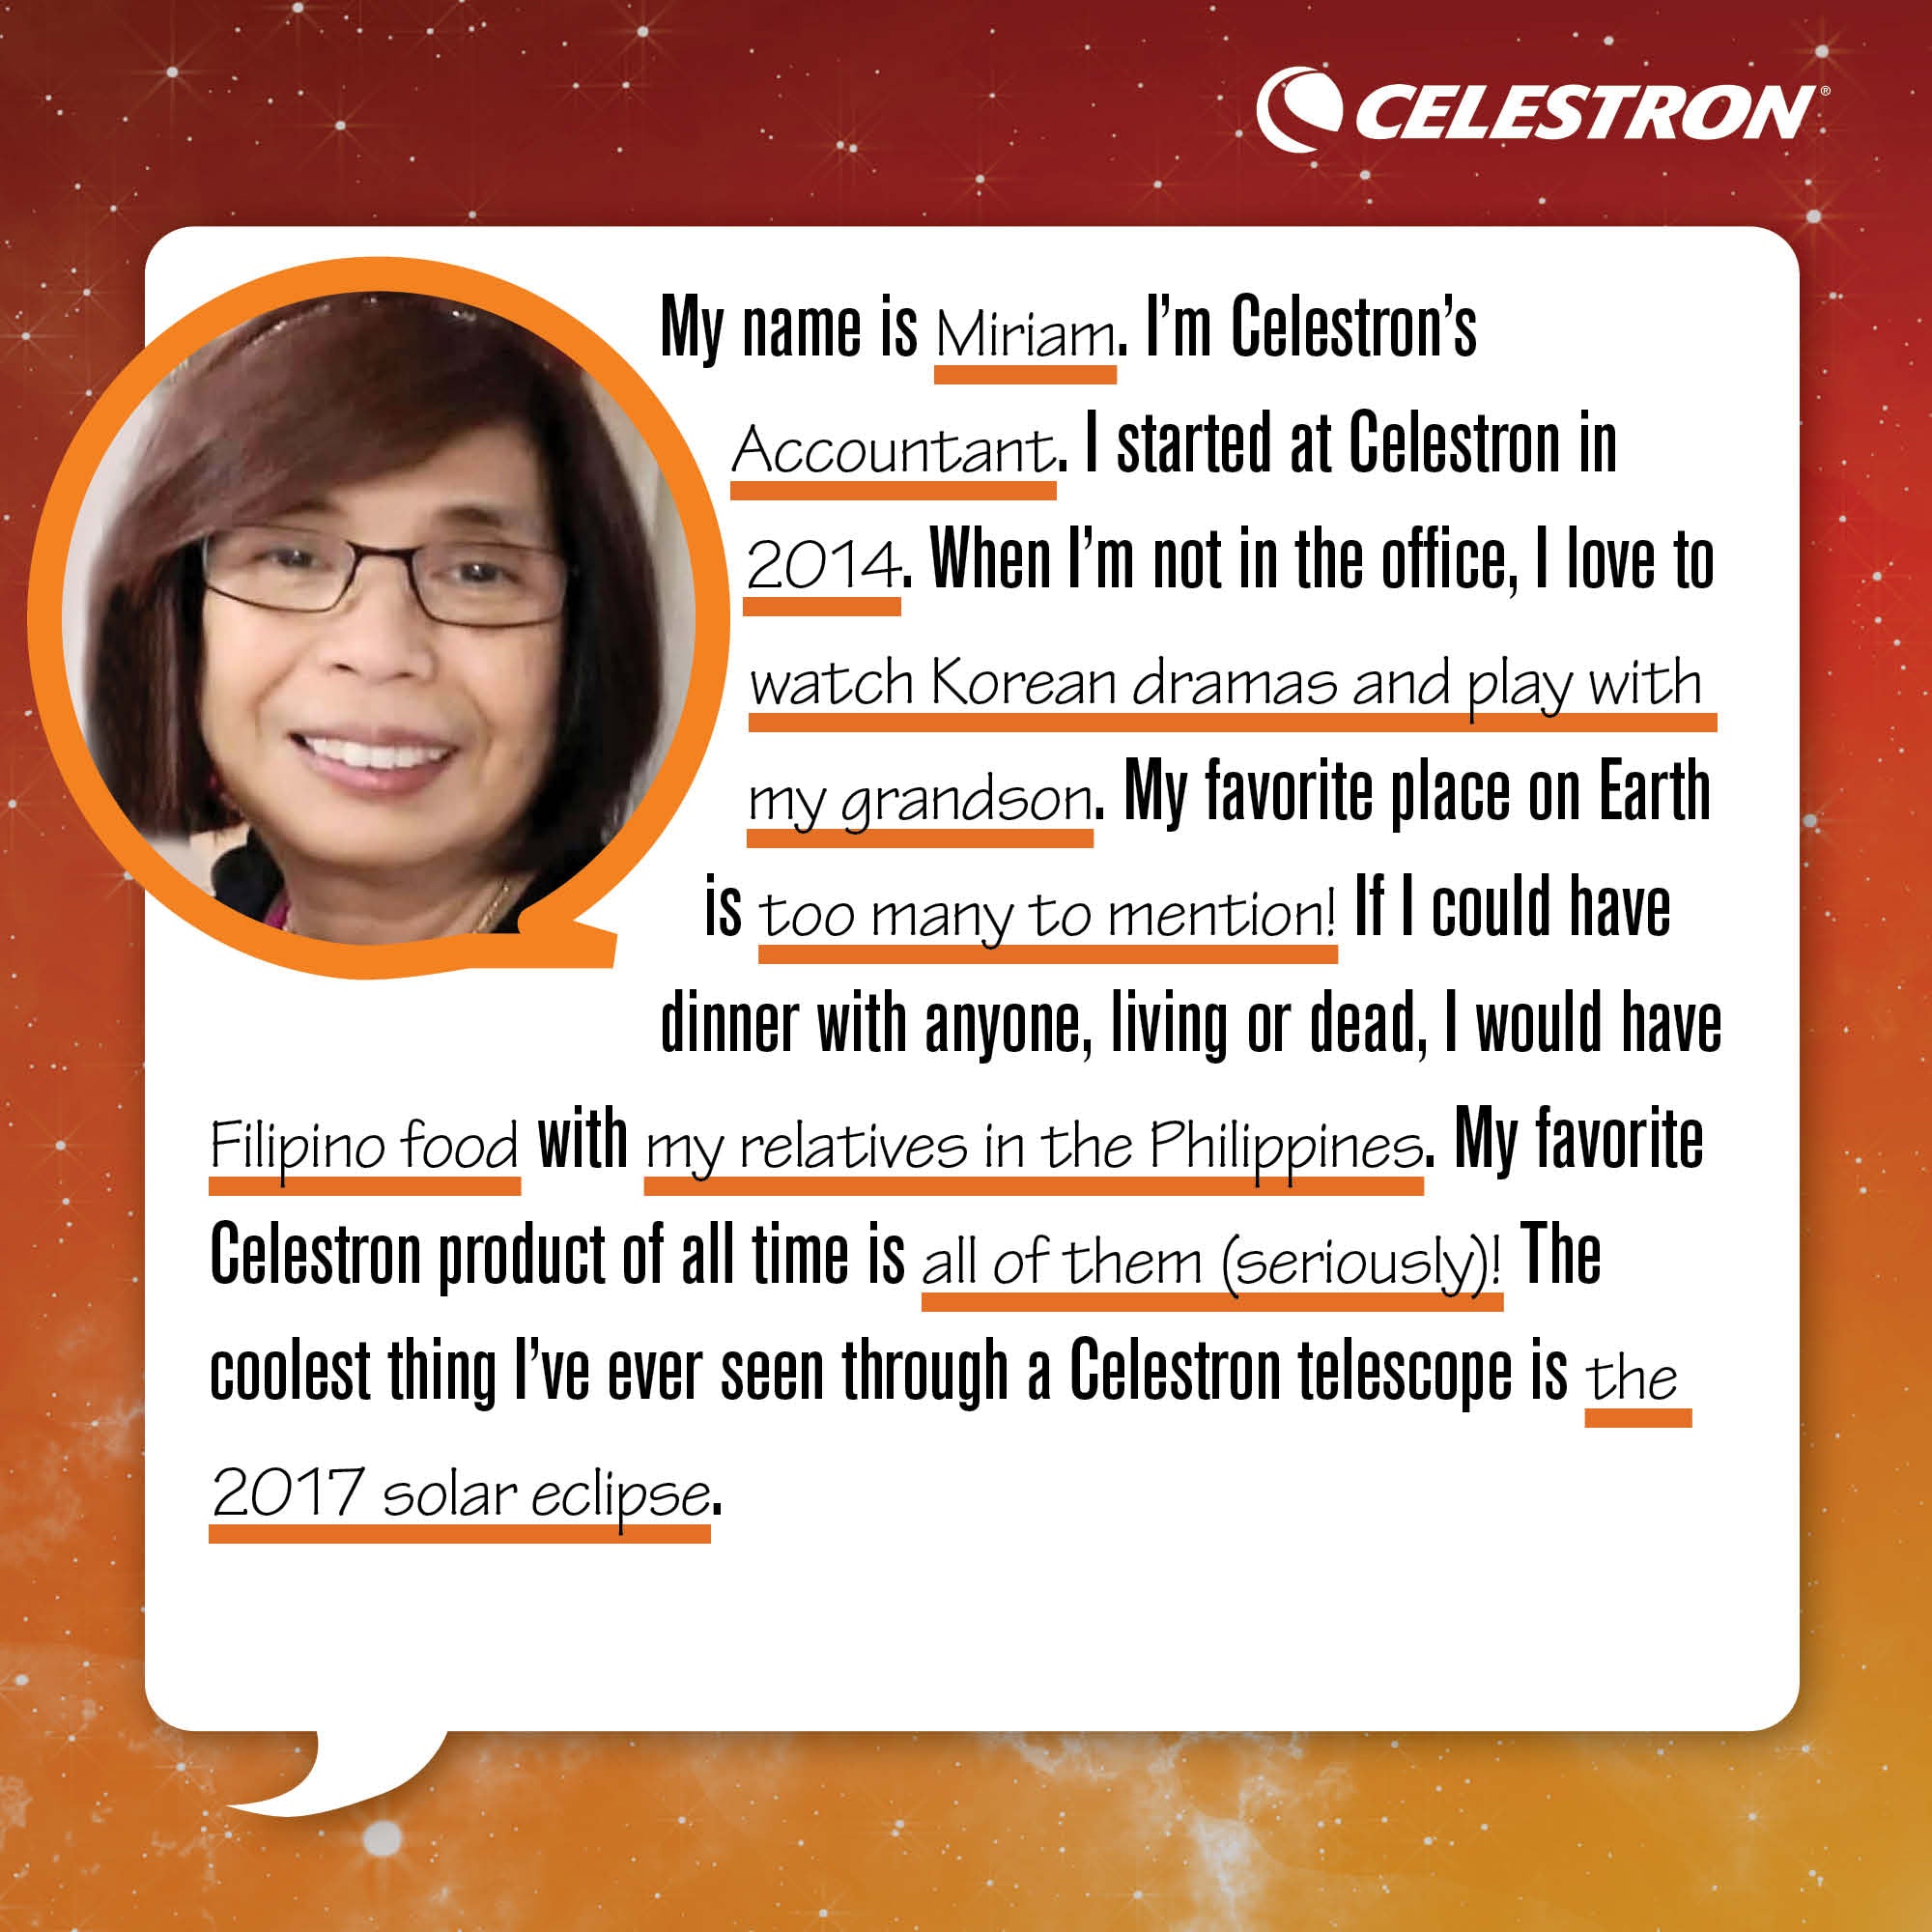 My name is Miriam. I'm Celestron's Accountant. I started at Celestron in 2014. When I'm not in the office, I love to watch Korean dramas and play with my grandson.  My favorite place on Earth is too many to mention! If I could have dinner with anyone, living or dead, I would have Filipino food with my relatives in the Philippines. My favorite Celestron product of all time is too many to mention (seriously)! The coolest thing I've ever seen through a Celestron telescope is the 2017 Solar Eclipse.